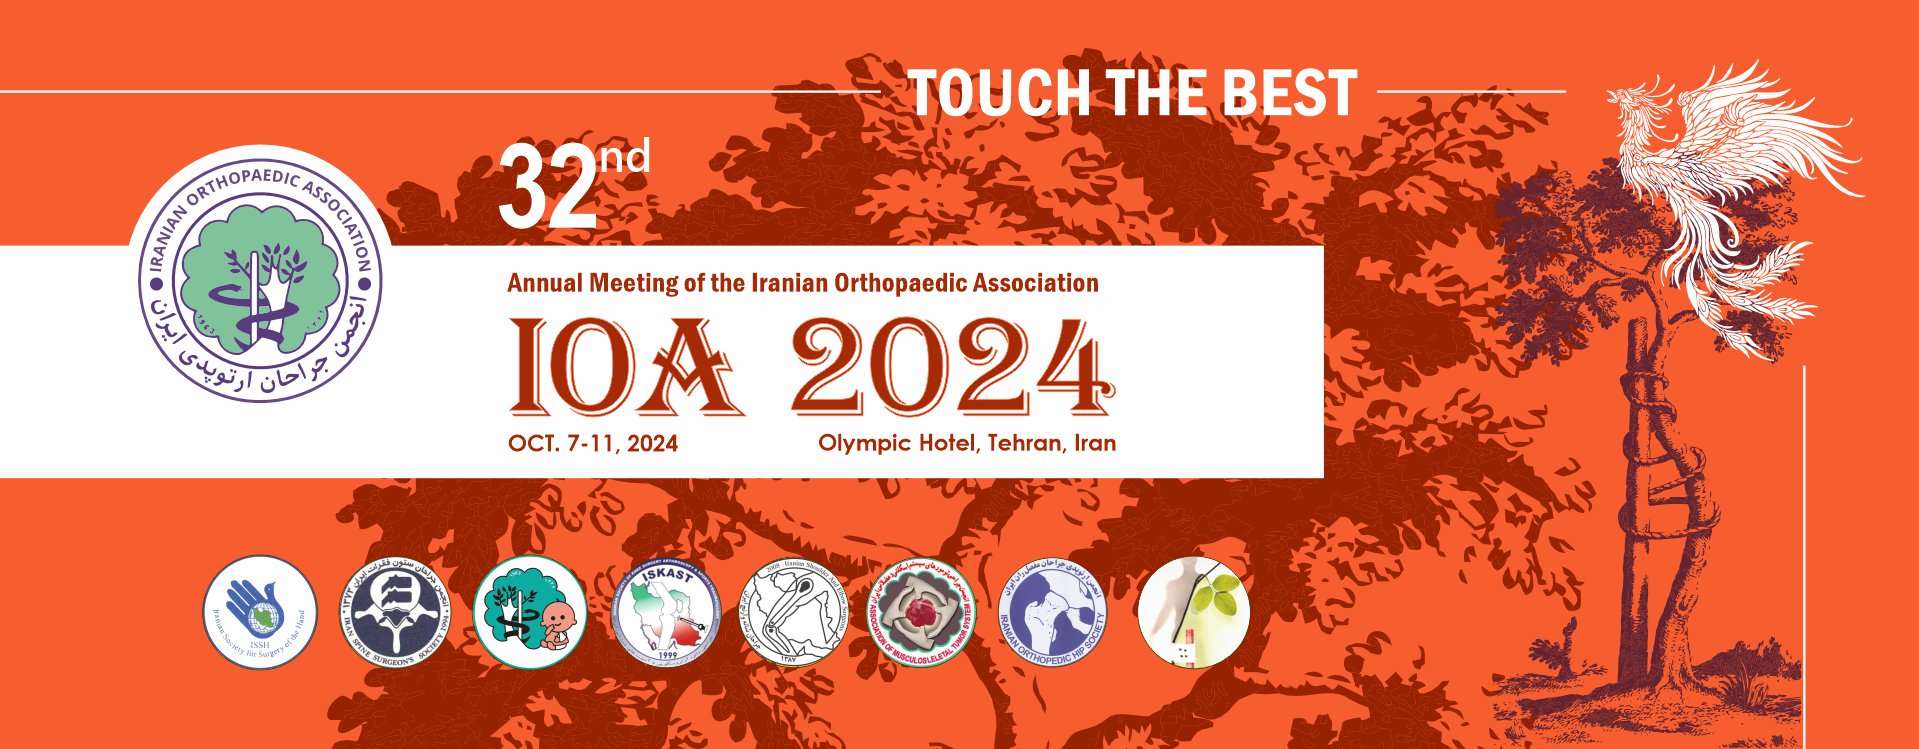 32nd Annual Meeting Of The Iranian Orthopaedic Association